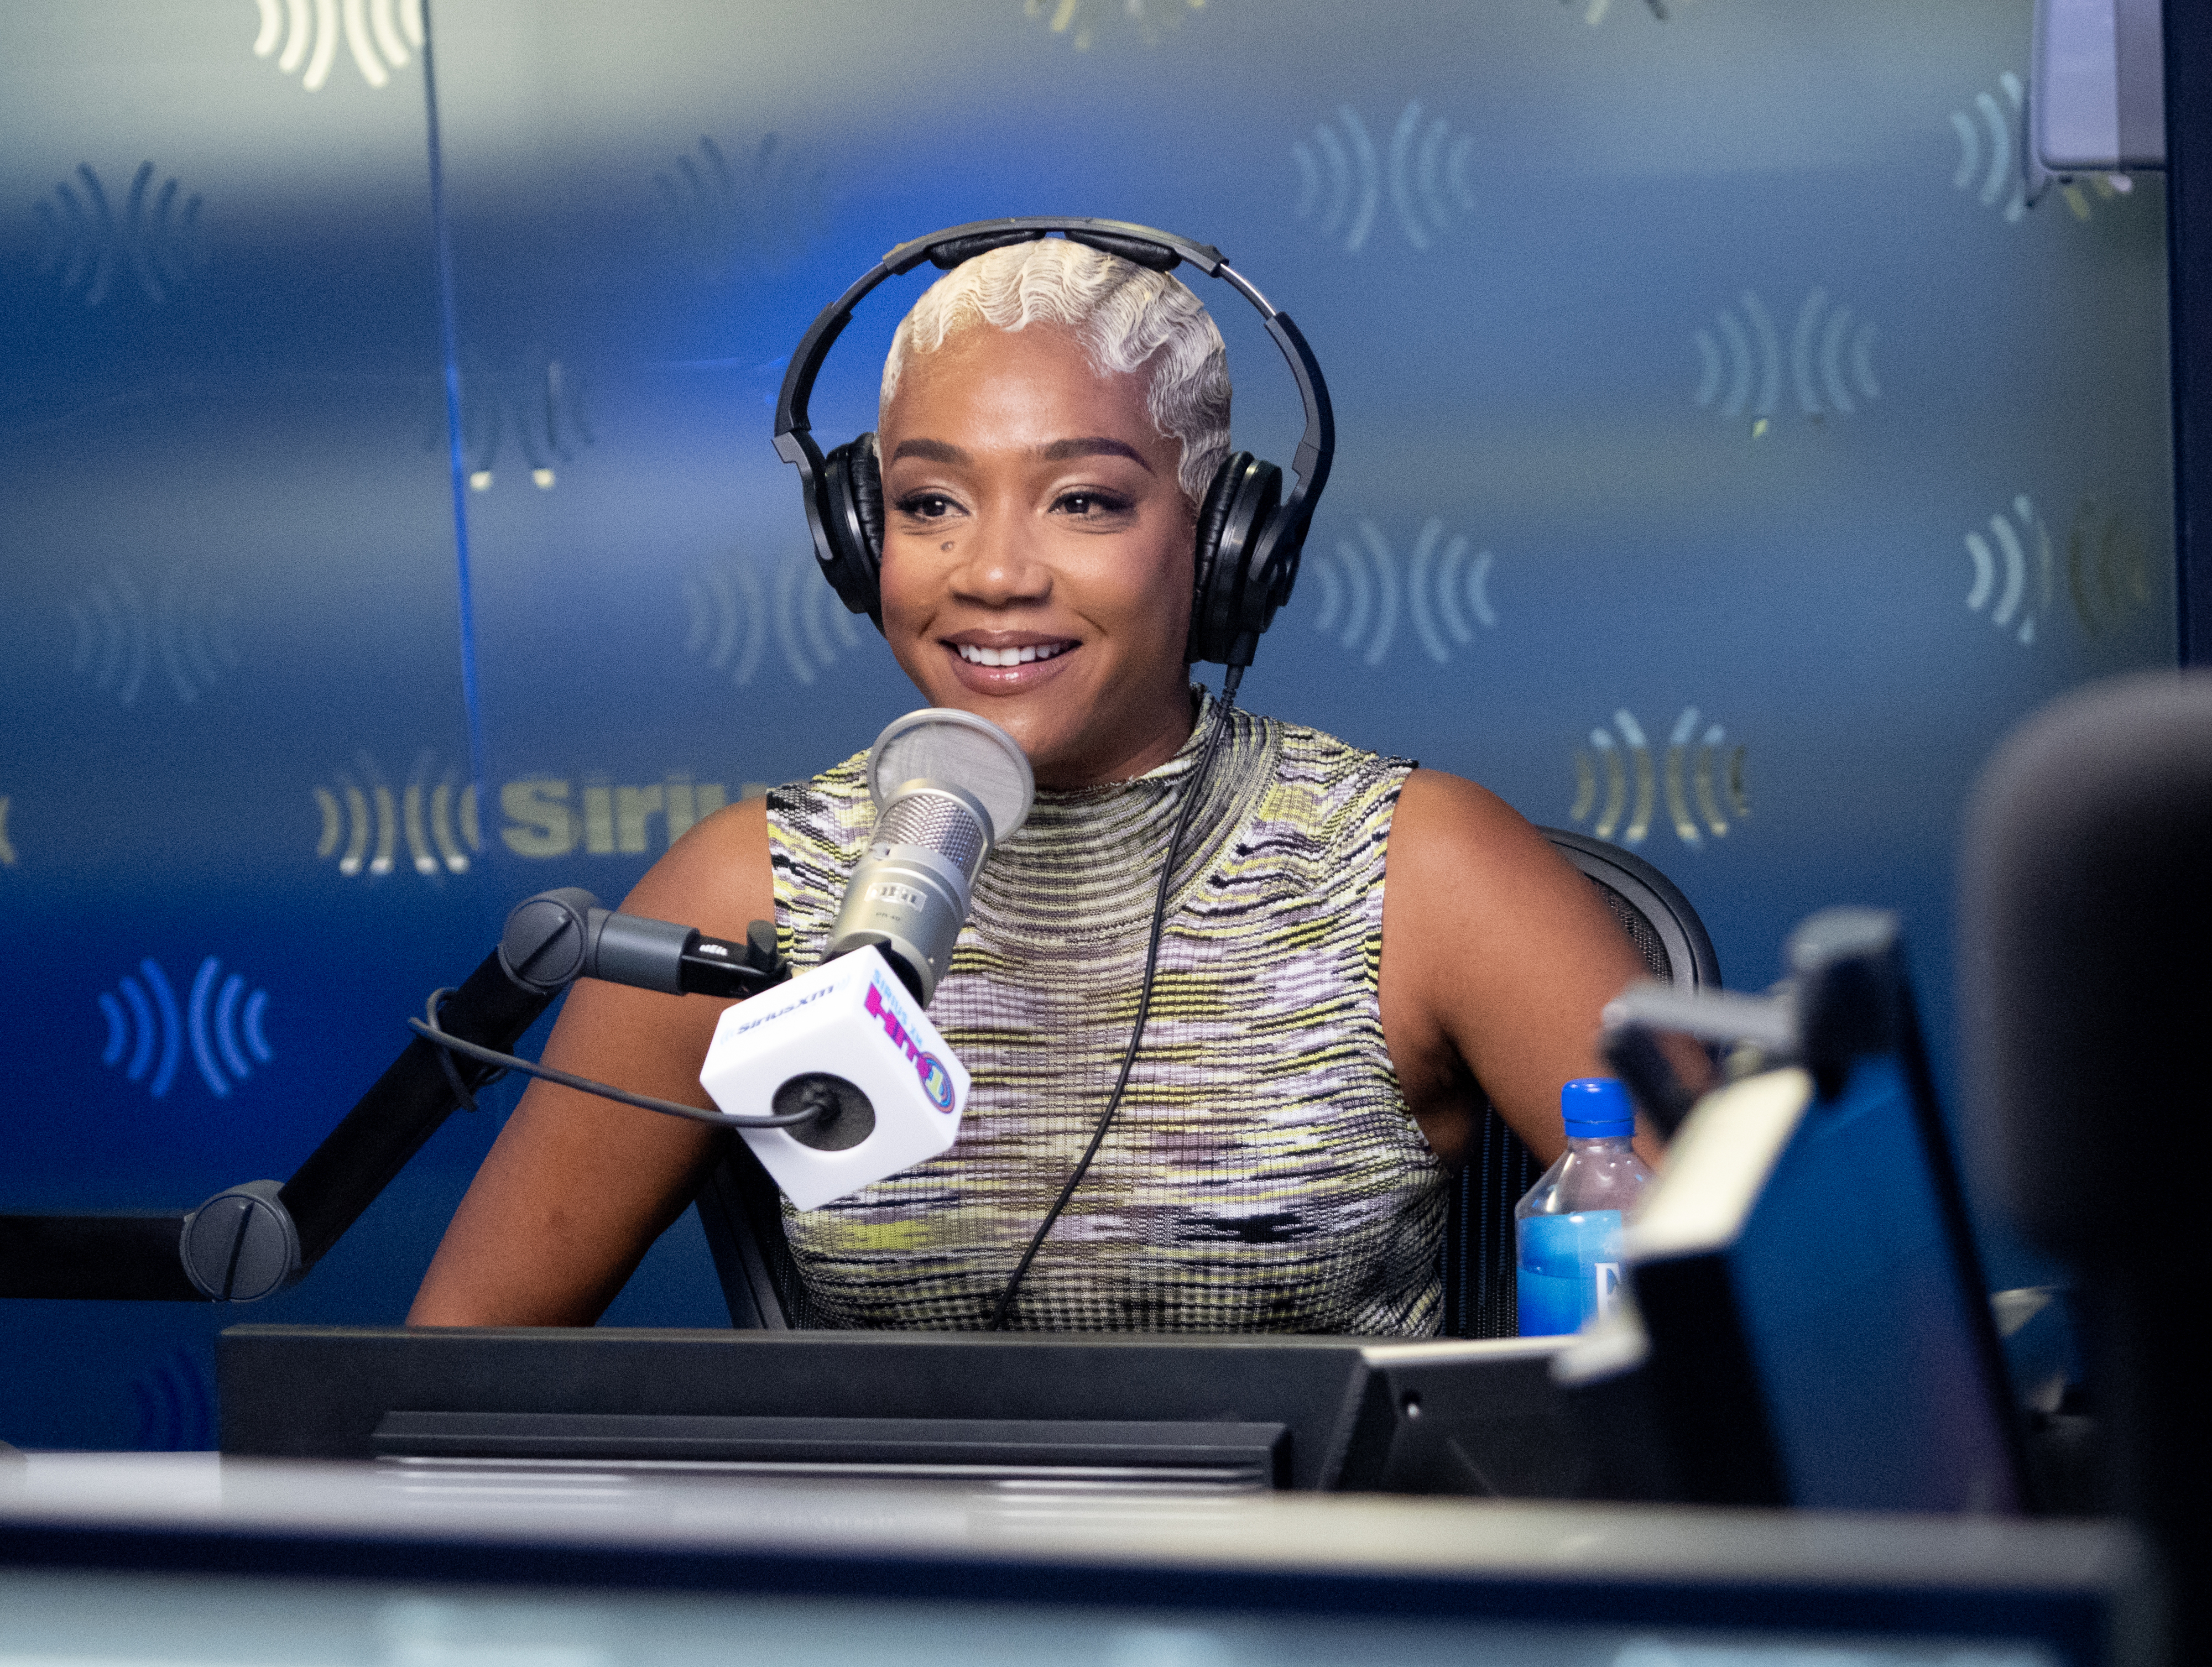 Tiffany Haddish wearing a sparkly sleeveless top, speaking into a microphone during a radio show interview